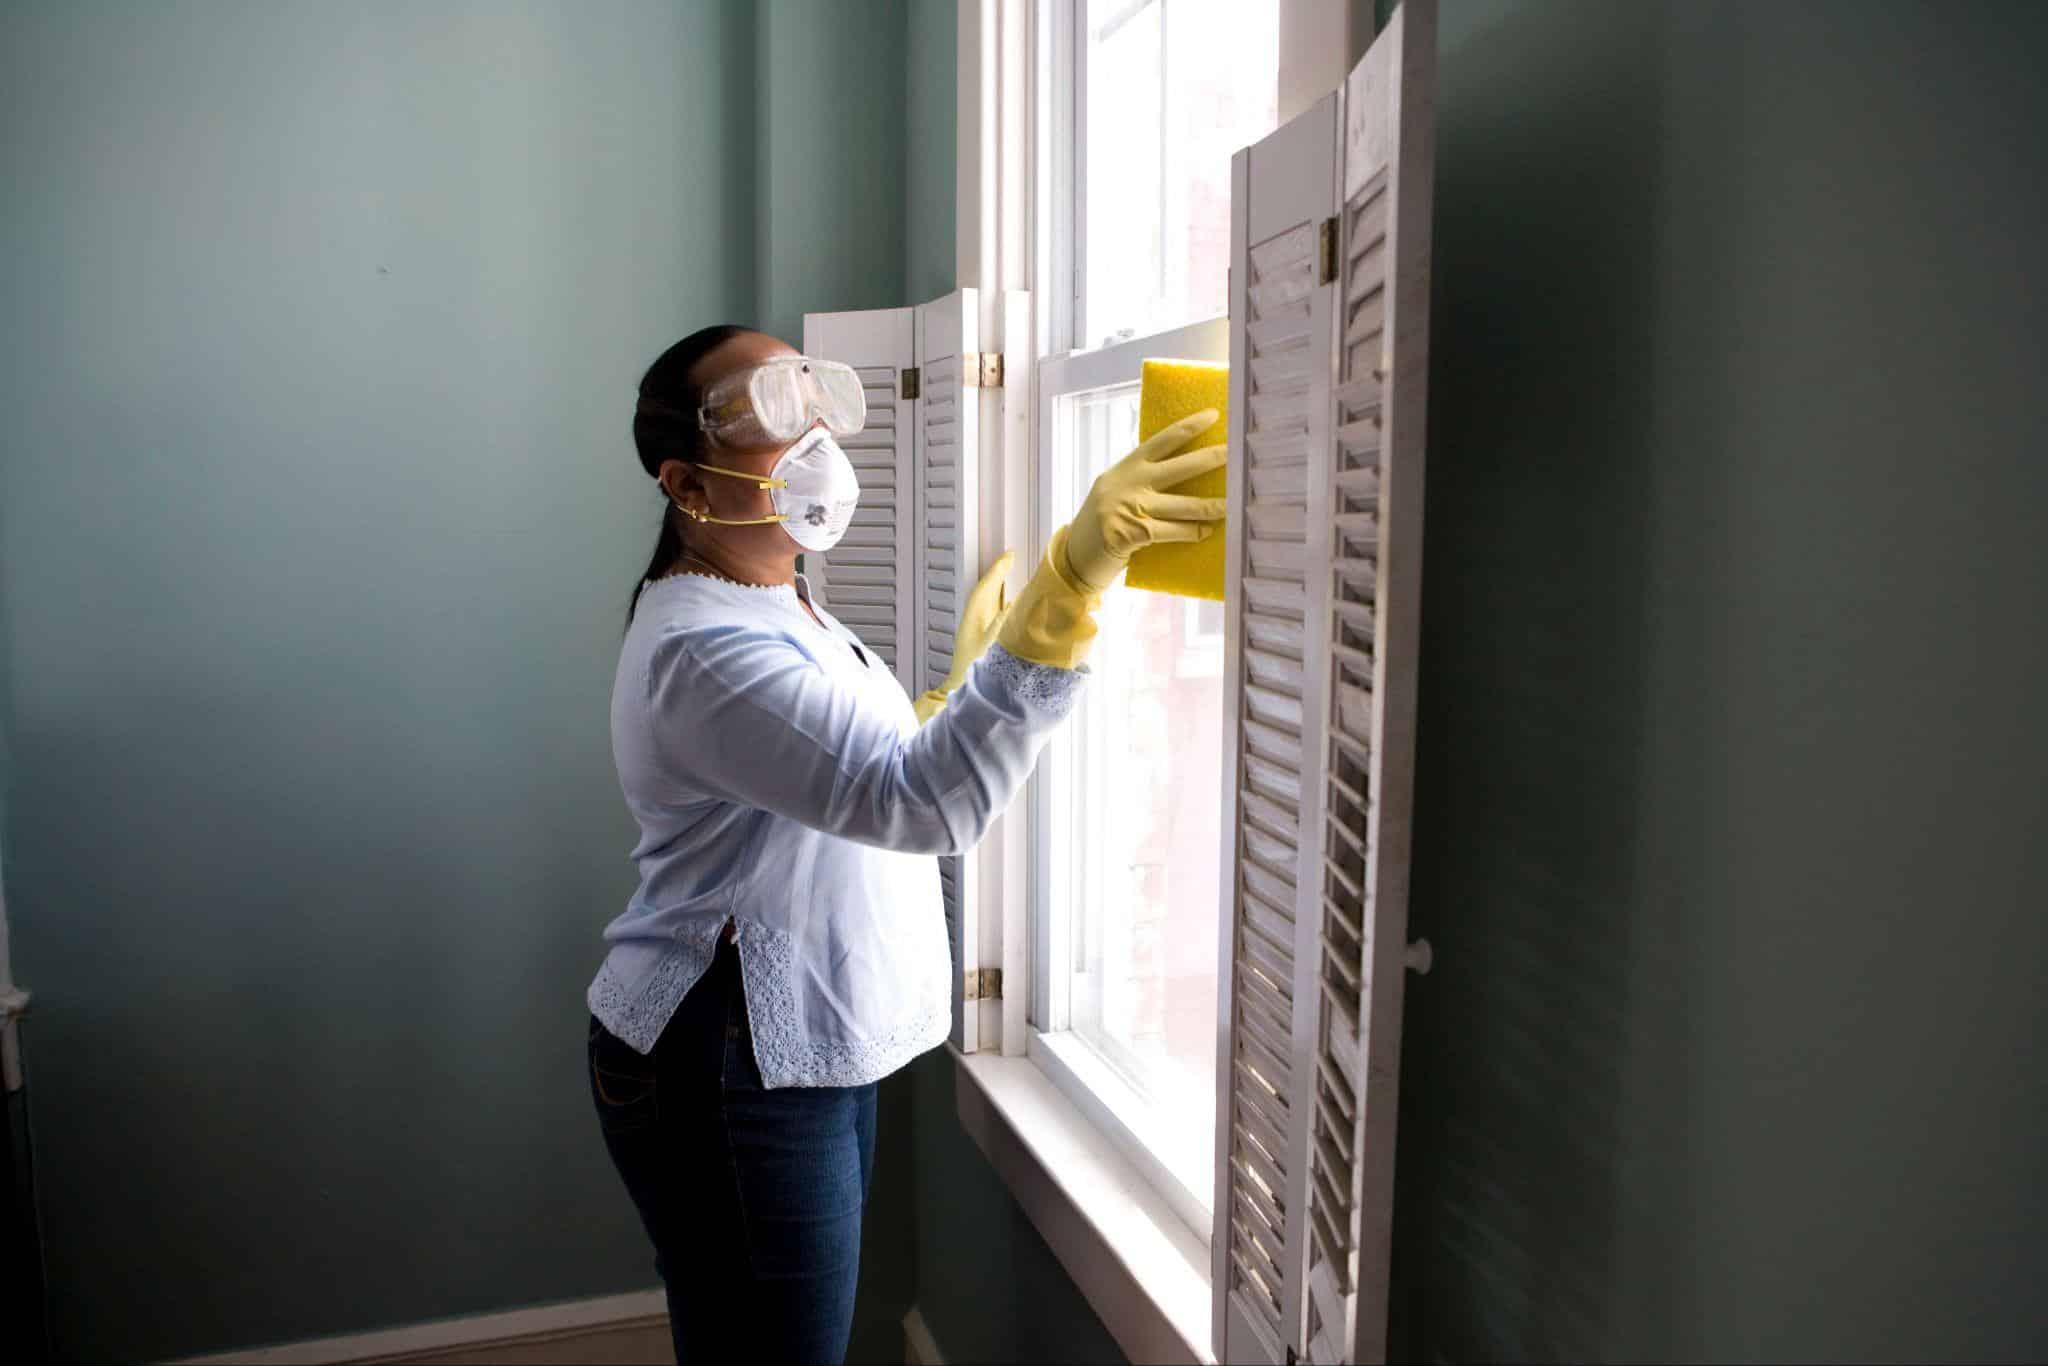 Discover effective DIY pest control techniques for homeowners in Rancho Cucamonga. Learn how to seal entry points, maintain cleanliness, and use natural repellents to keep pests at bay.